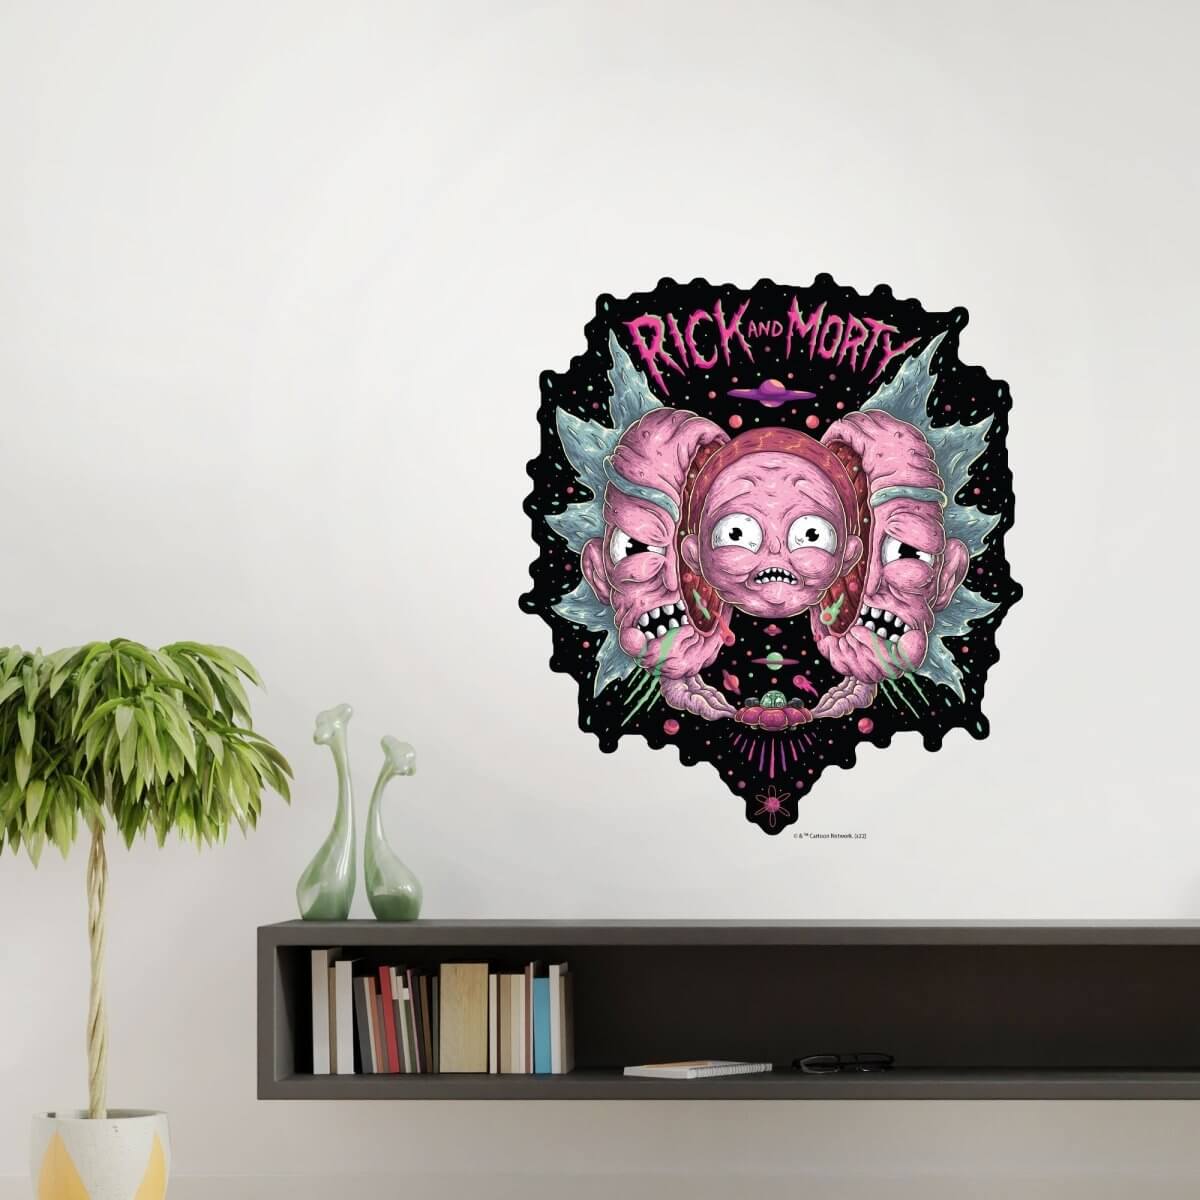 Kismet Decals Rick & Morty Psychedelic Monsters 5 Licensed Wall Sticker - Easy DIY Home & Kids Room Decor Wall Decal Art - Kismet Decals